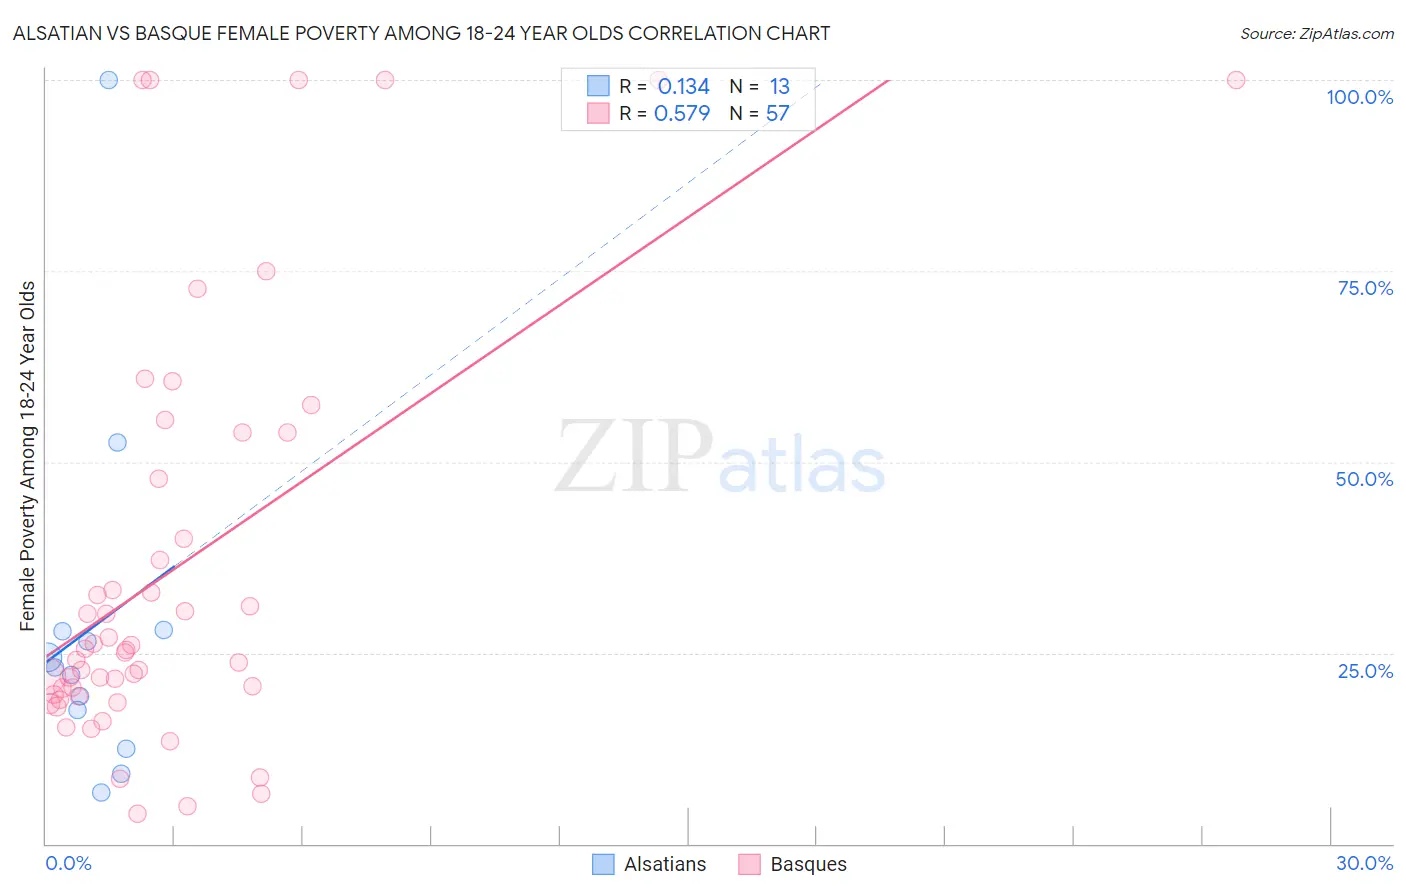 Alsatian vs Basque Female Poverty Among 18-24 Year Olds